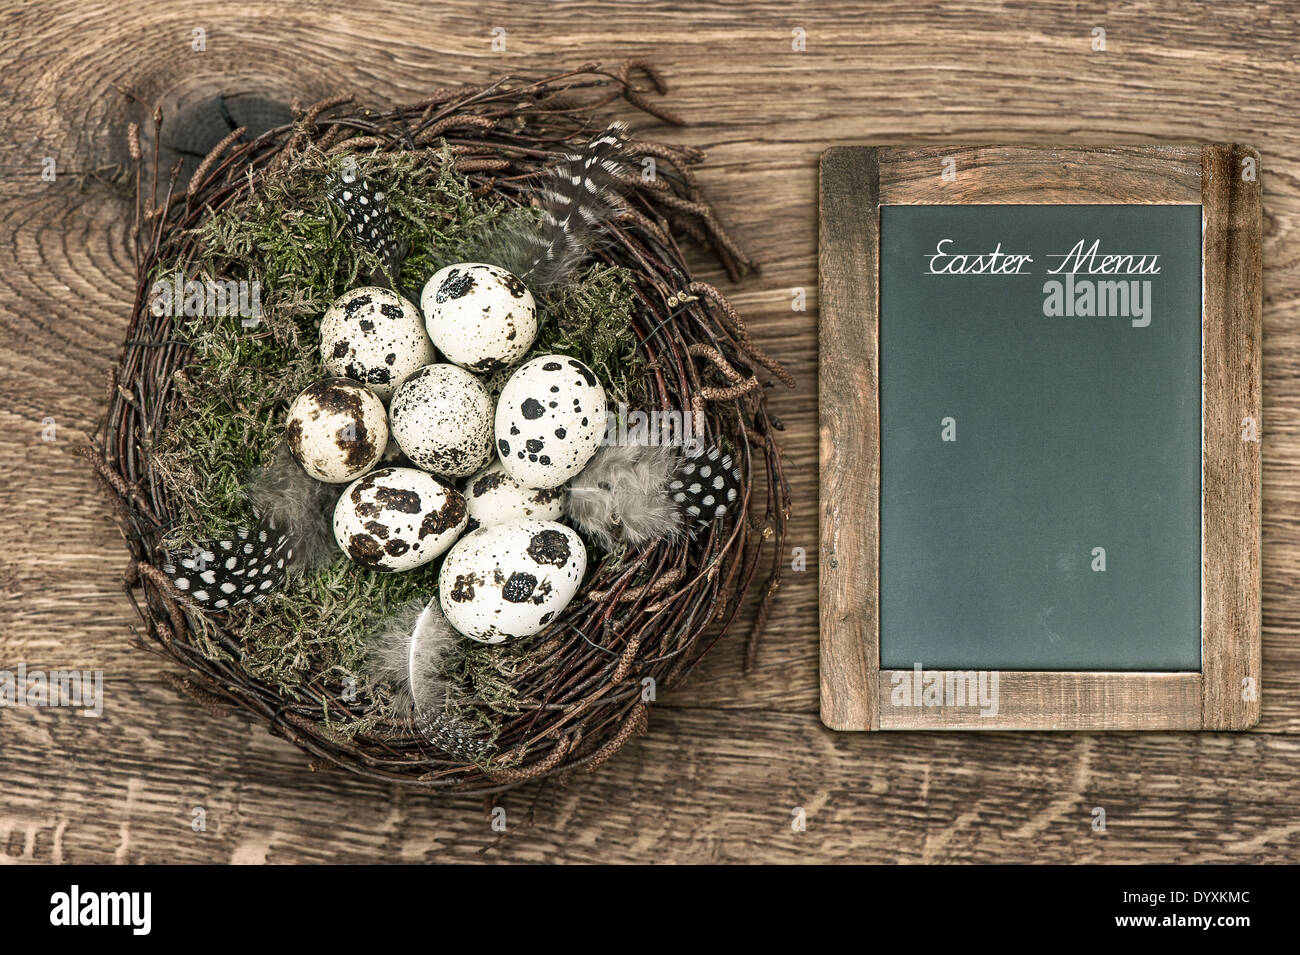 birds eggs in nest on rustic wooden background. vintage easter decoration with blackboard and sample text Easter Menu Stock Photo